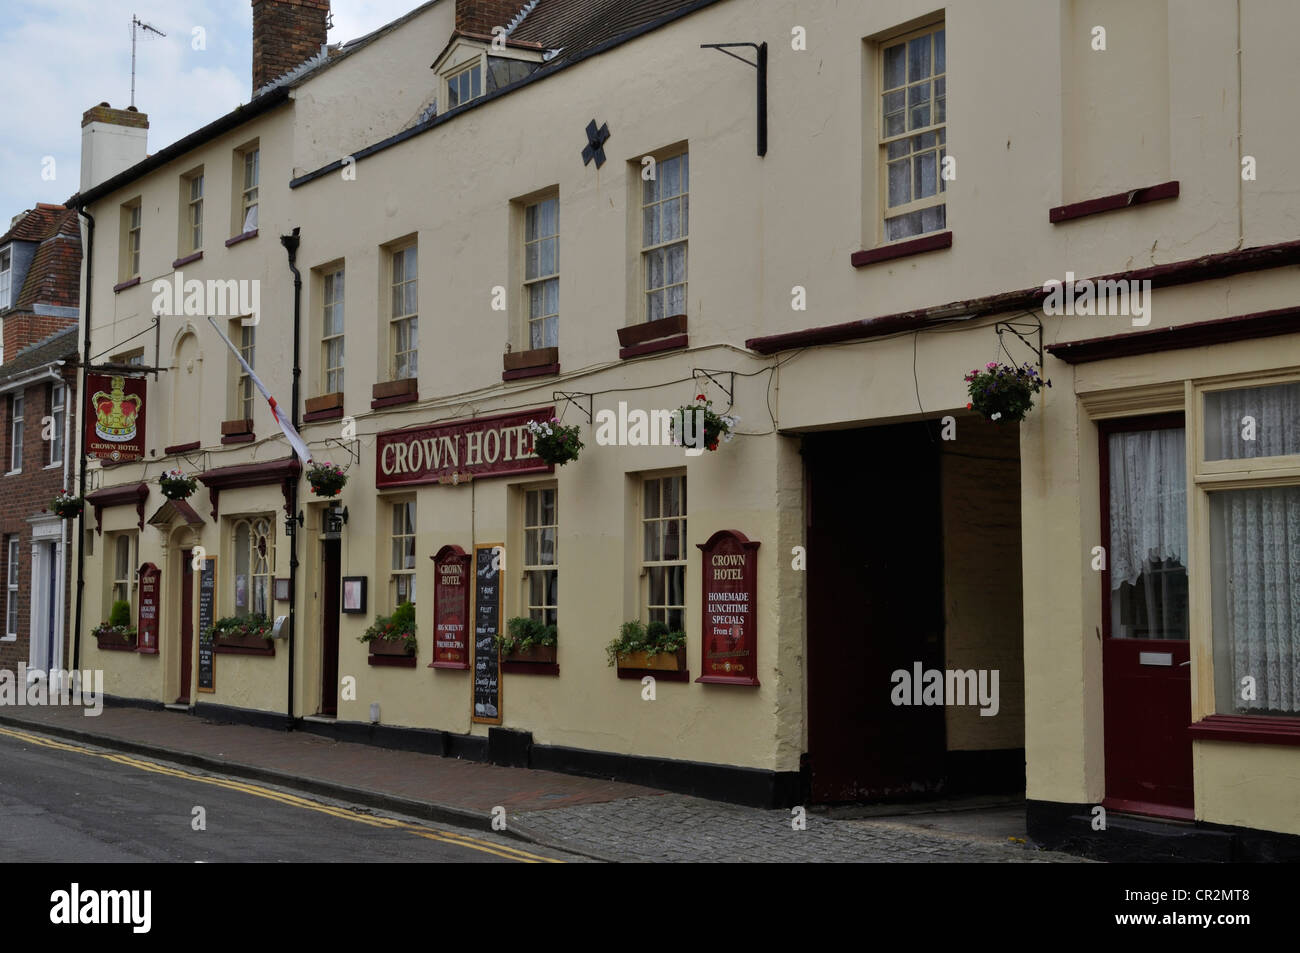 The Crown Hotel is an unpretentious public house with accommodation in the centre of Poole, Dorset. Stock Photo